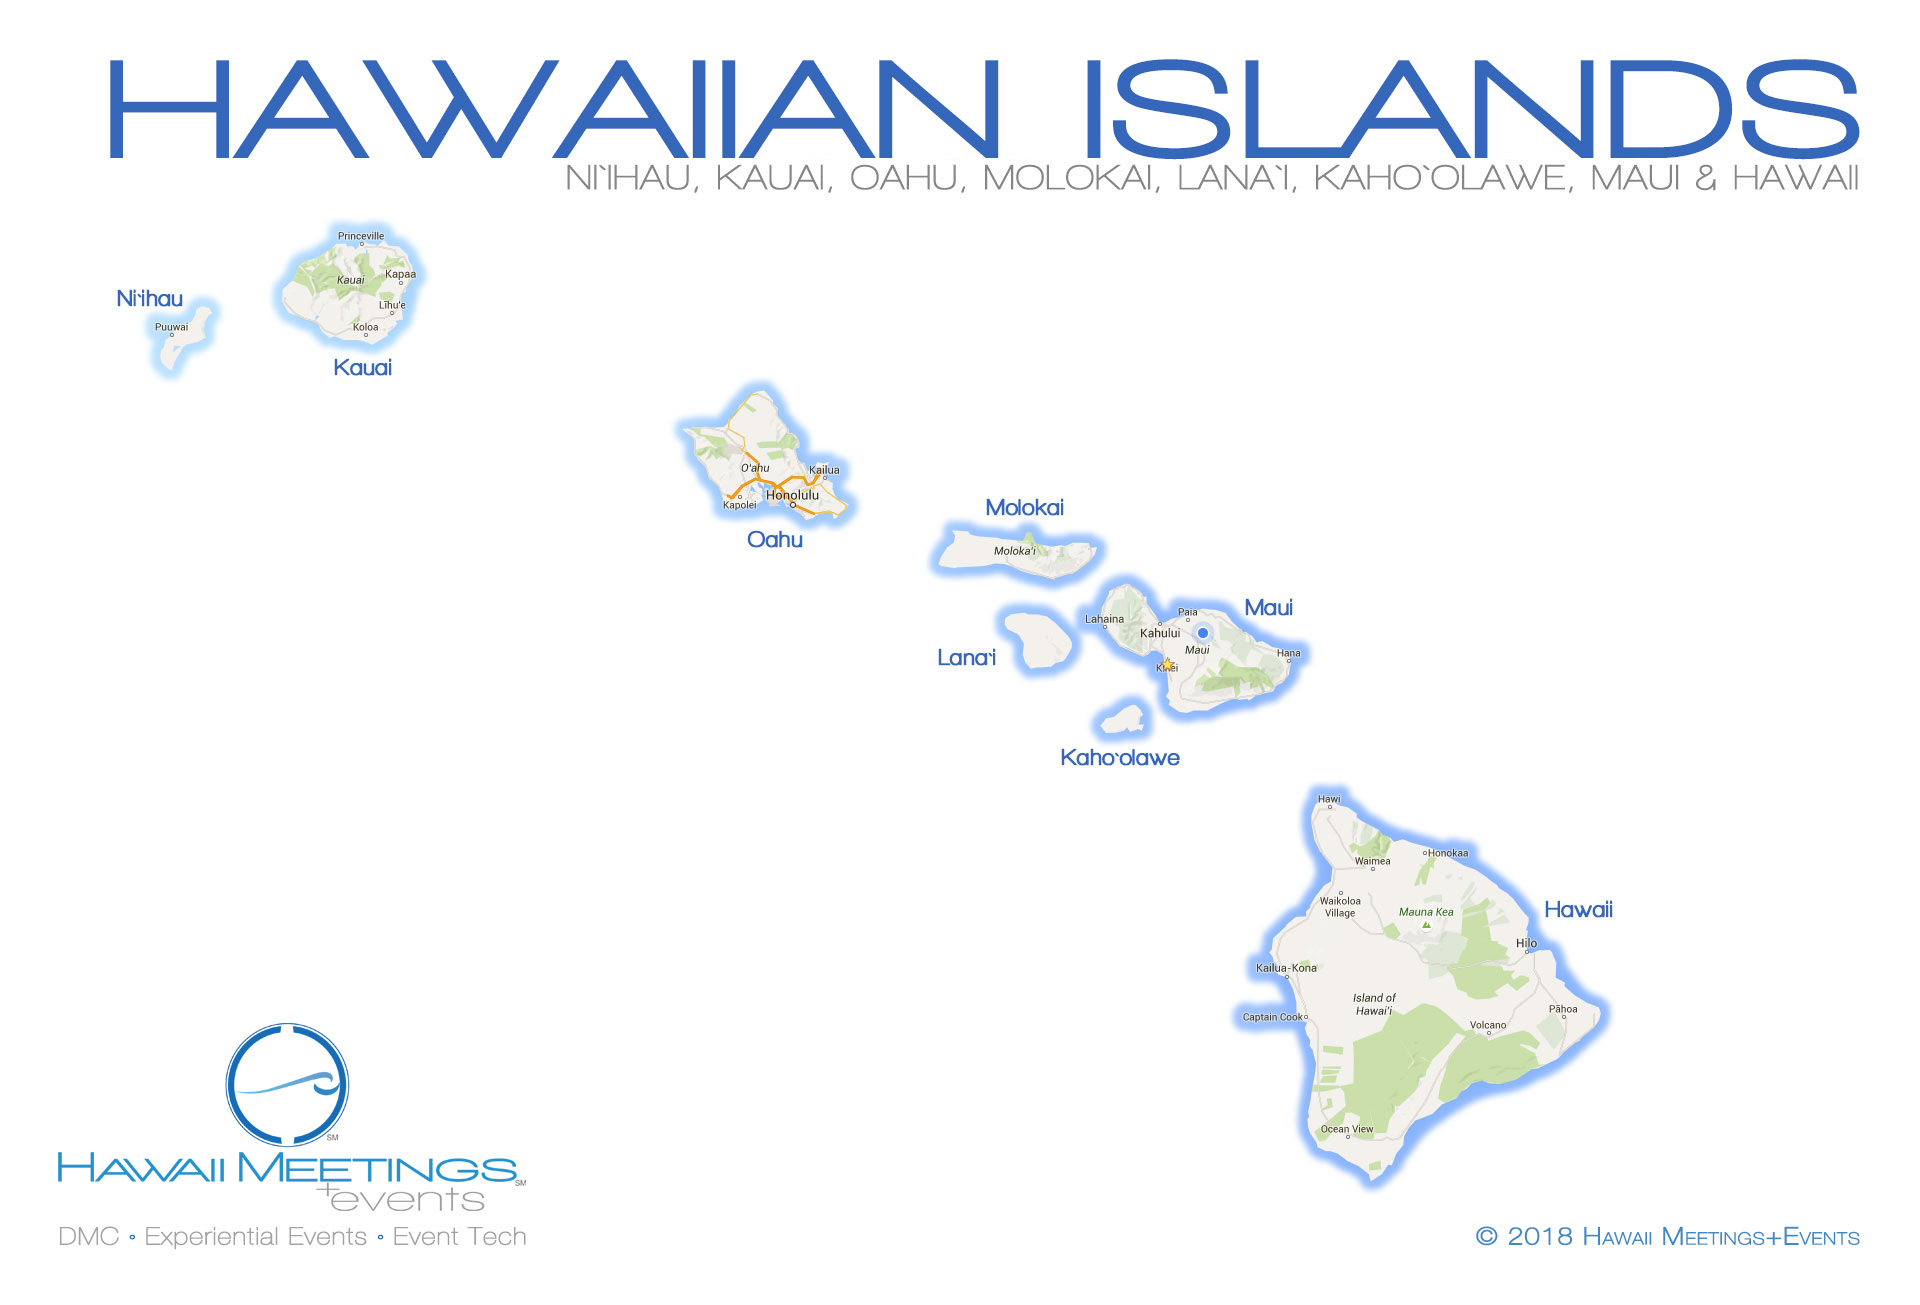 The Hawaii Islands has some of the worlds finest incentive meeting location in the world.